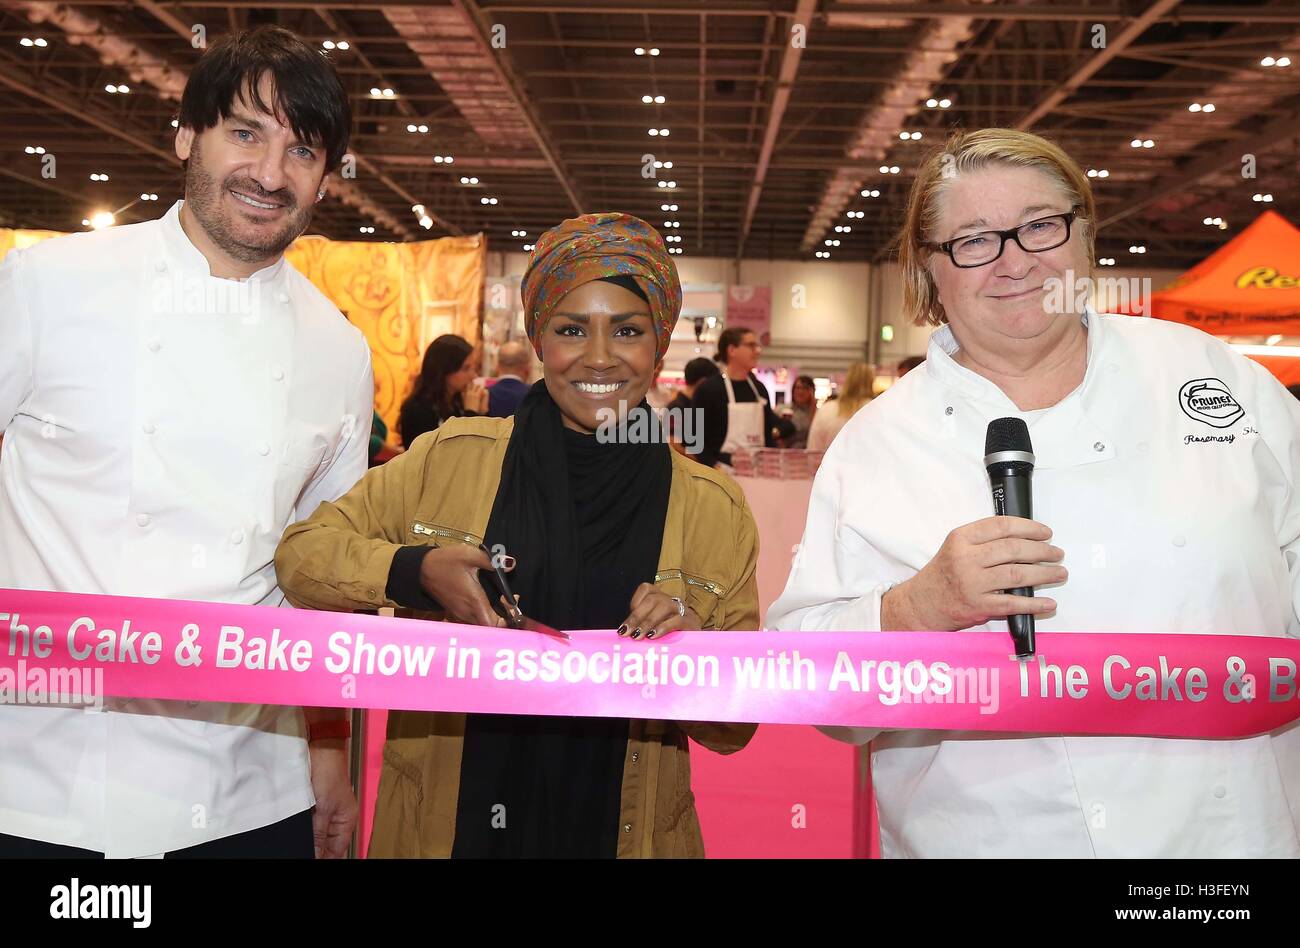 (Left to right) Master patissier Eric Lanlard, Great British Bake Off winner Nadiya Hussain and TV chef Rosemary Shrager open the Cake and Bake Show at ExCeL in London. Stock Photo